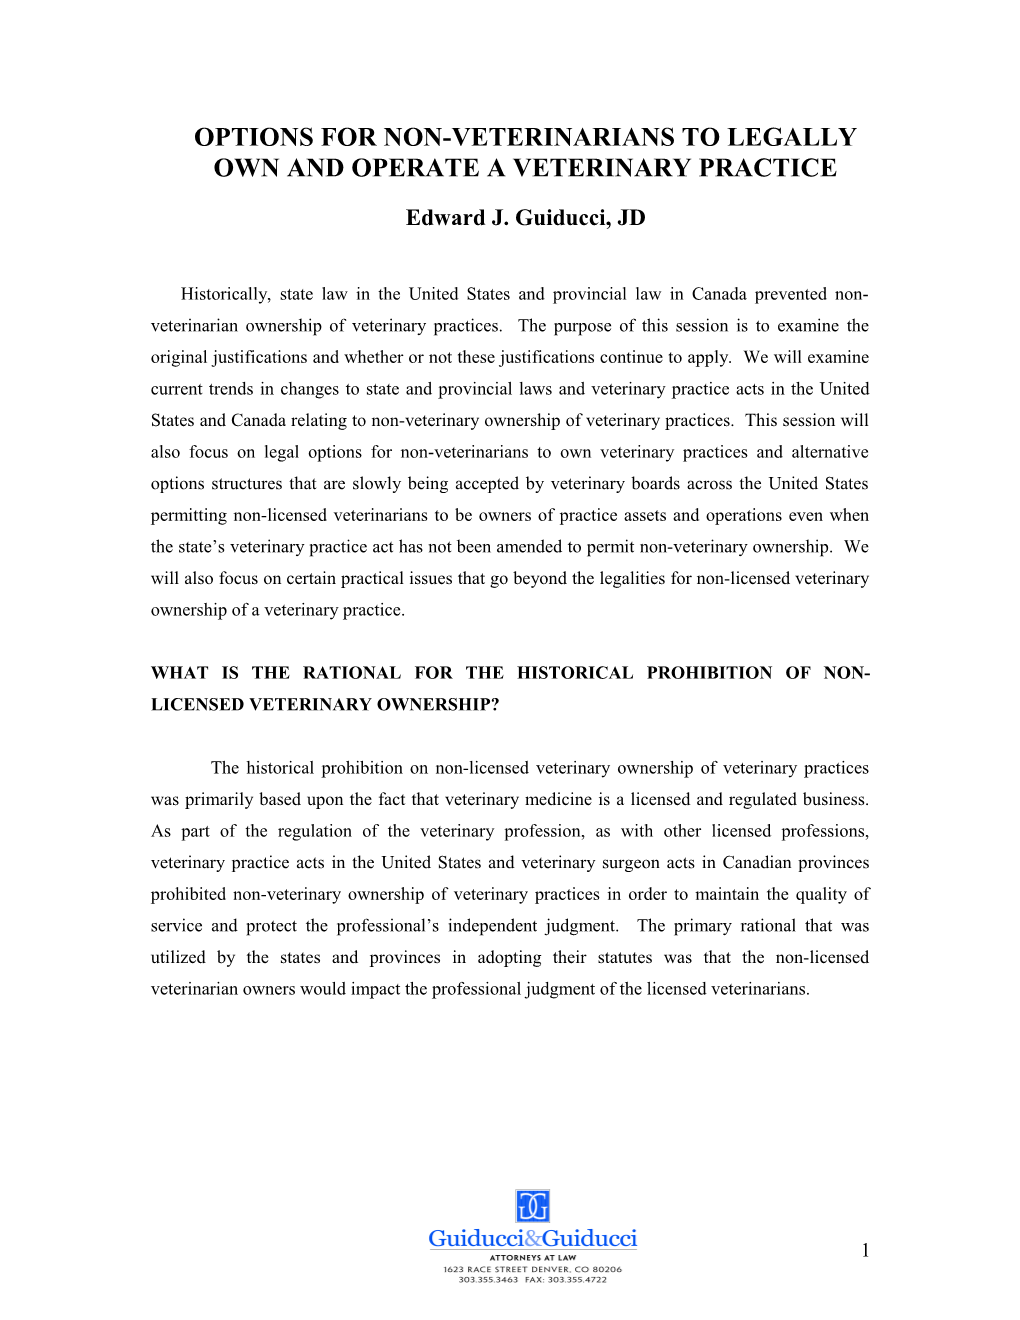 Options for Non-Veterinarians to Legally Own and Operate a Veterinary Practice